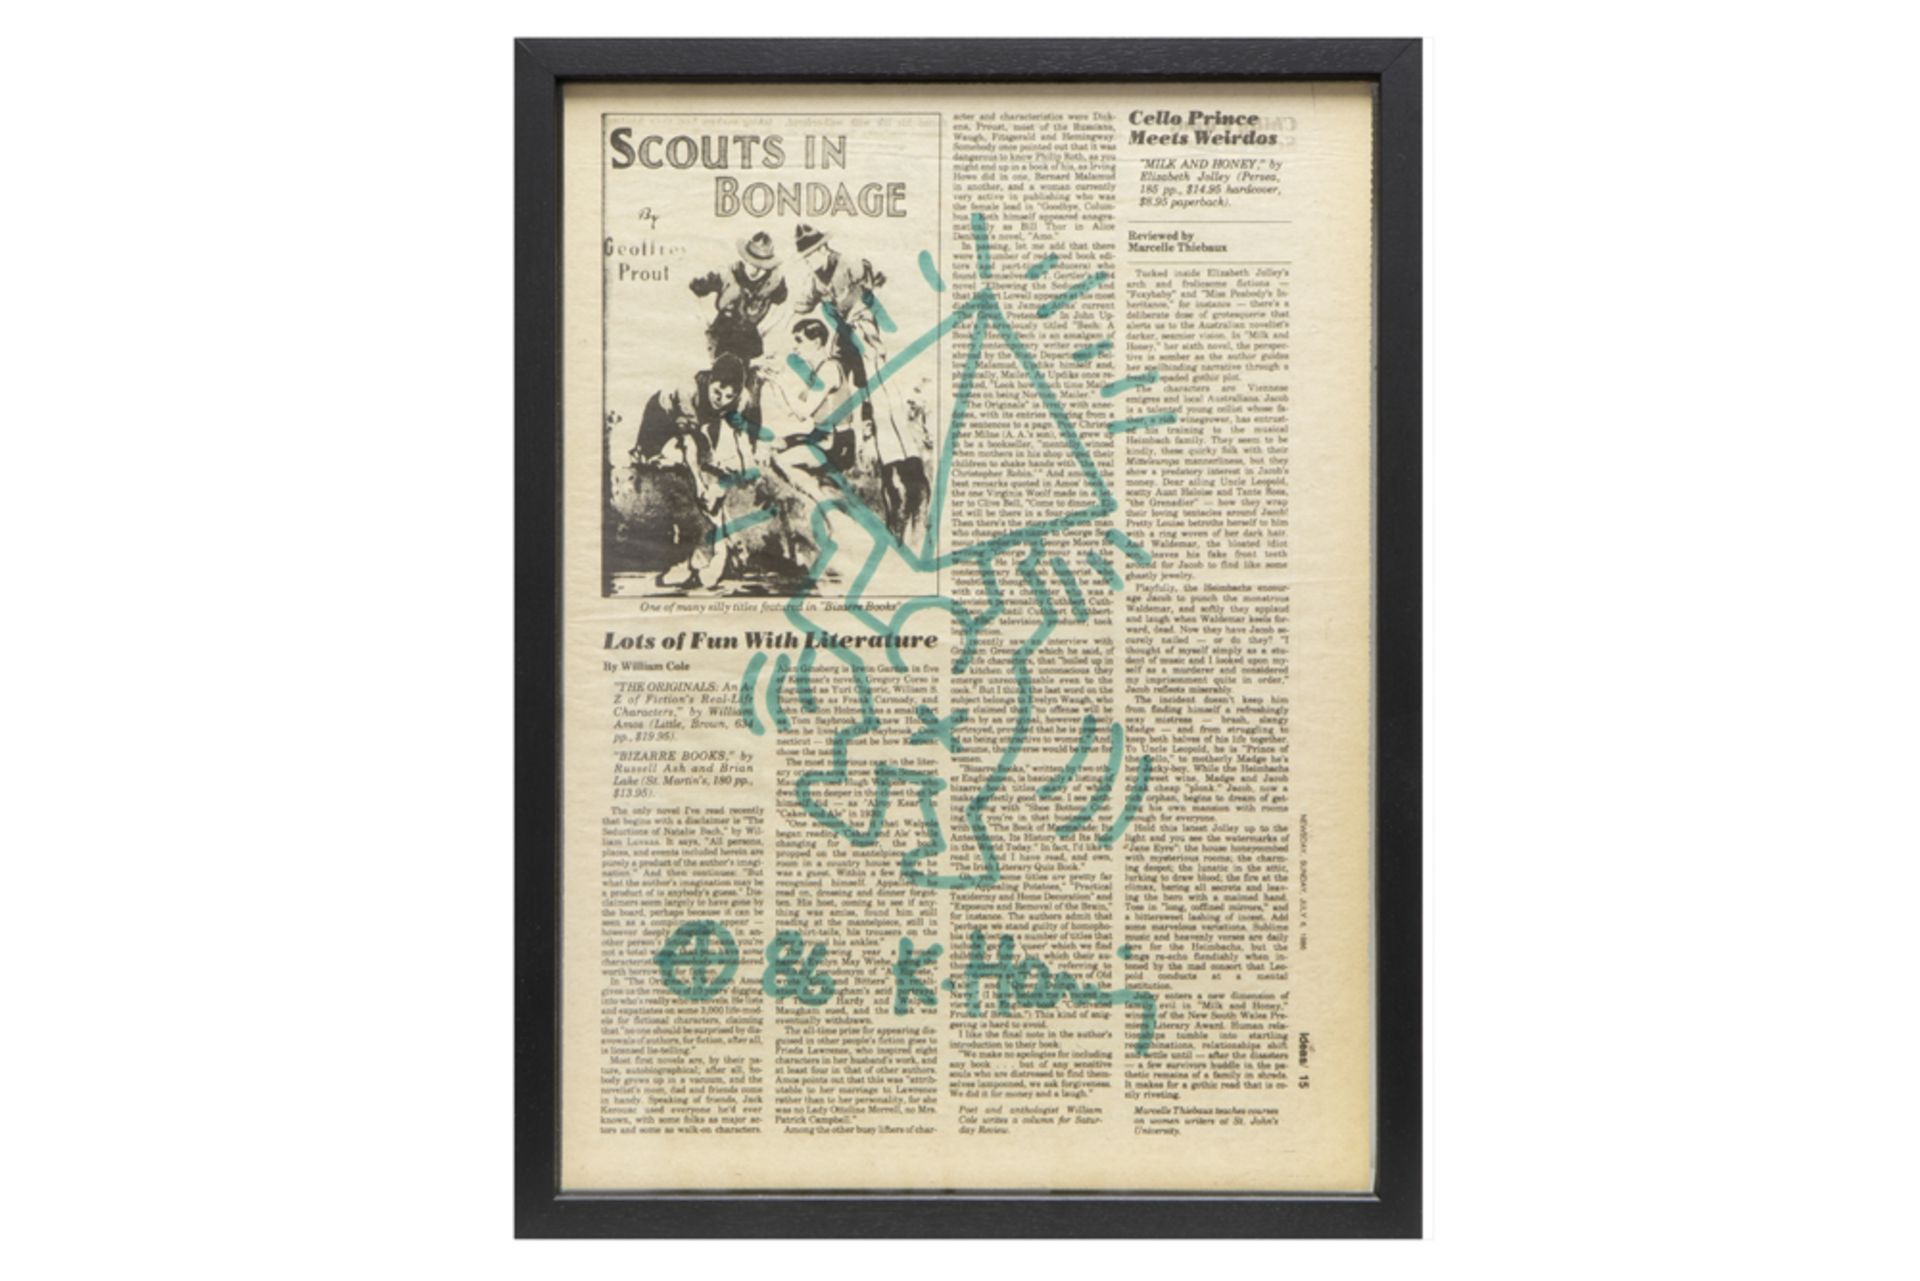 Keith Haring drawing in green feltpen on a newspaper (edition of "Newsday" dd Sunday, July 6, - Image 7 of 8